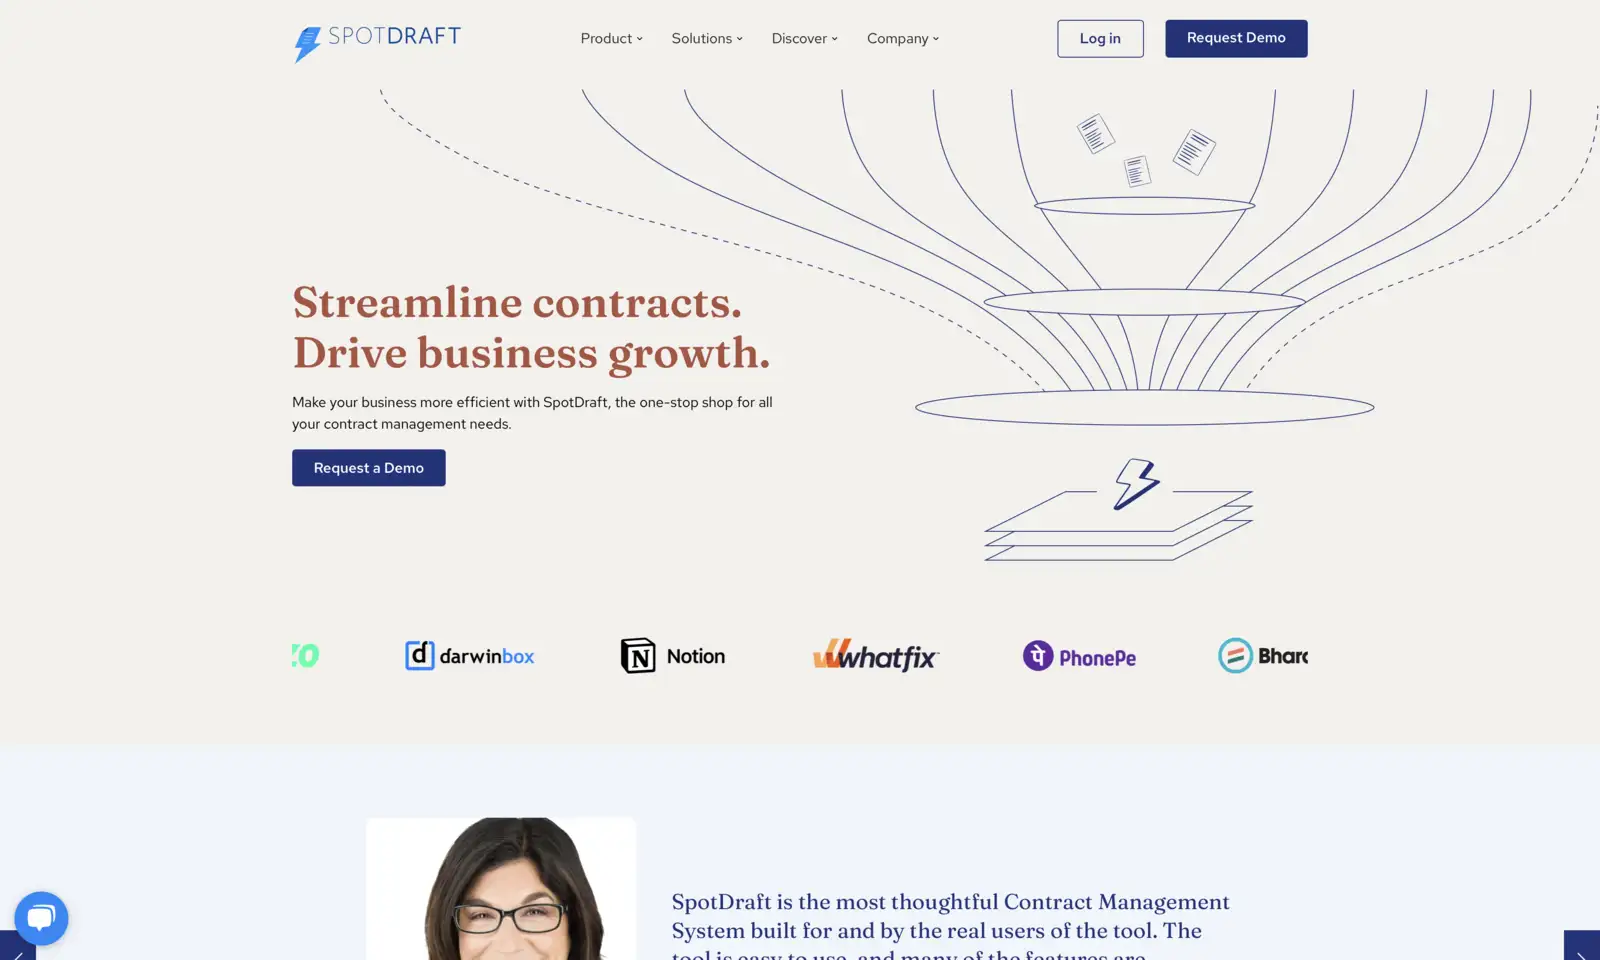 SpotDraft - SaaS Contract Management Product's Website made in Webflow